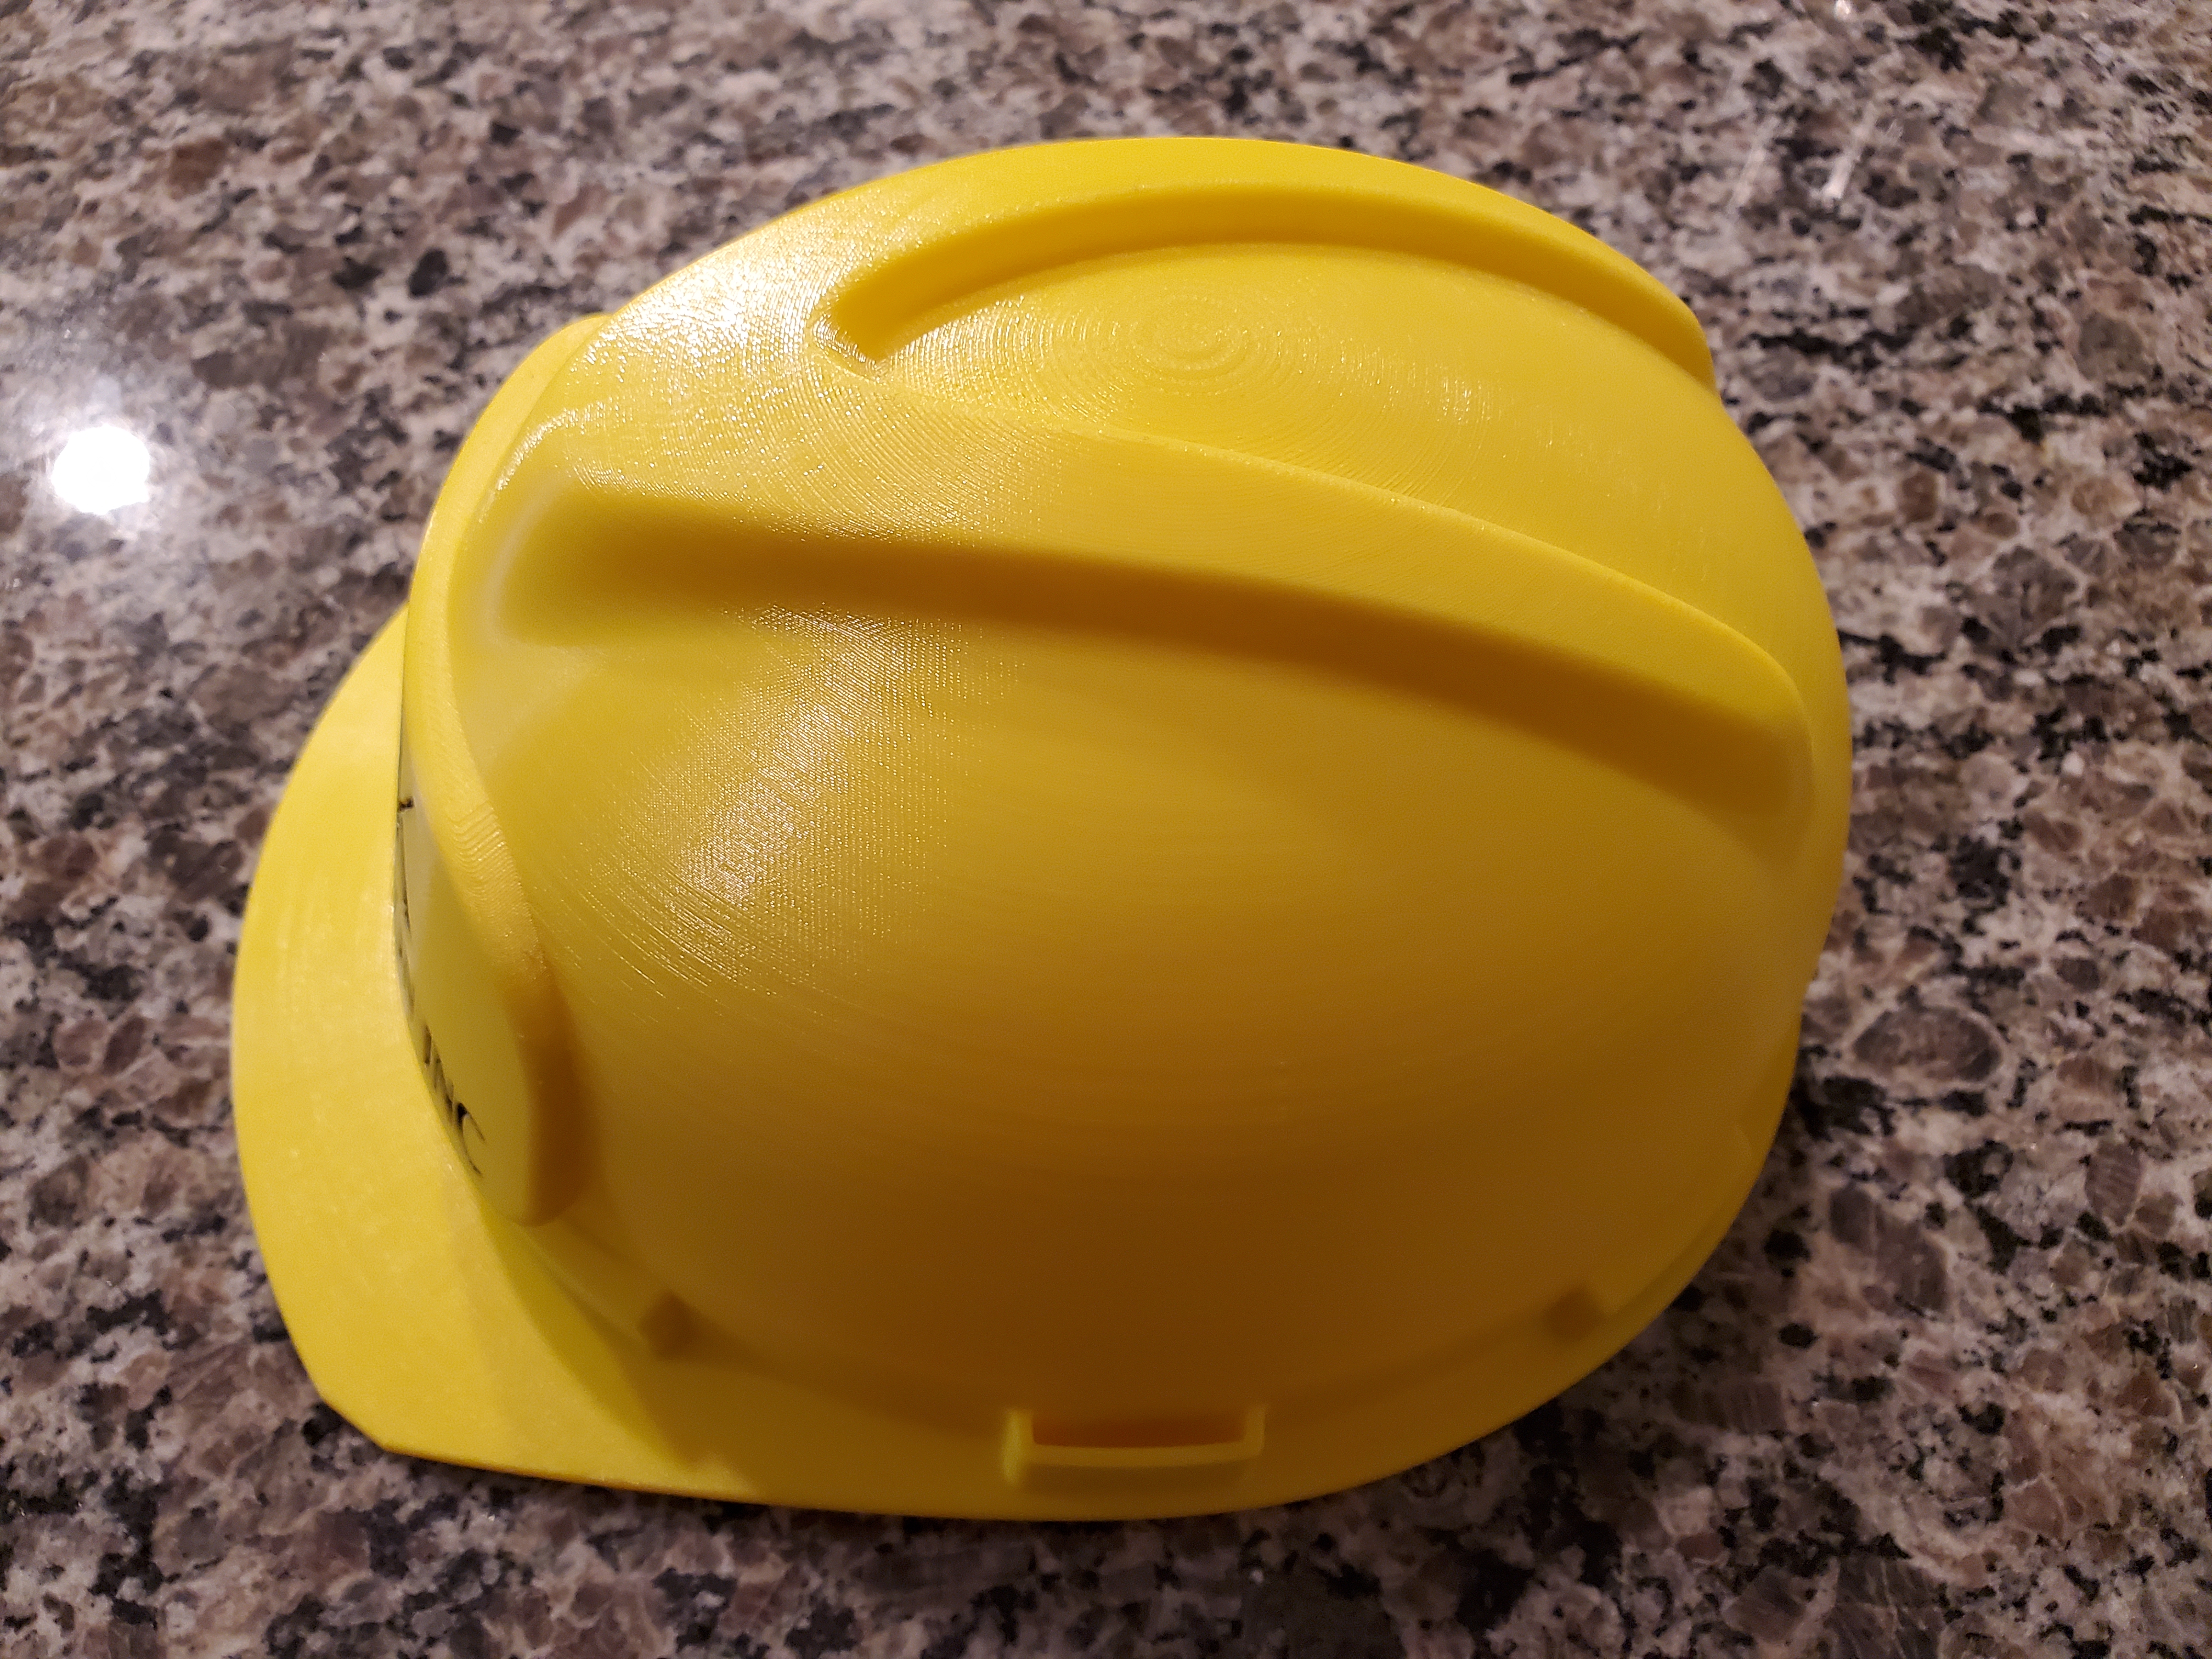 Toddler's Construction Helmet with Harness.